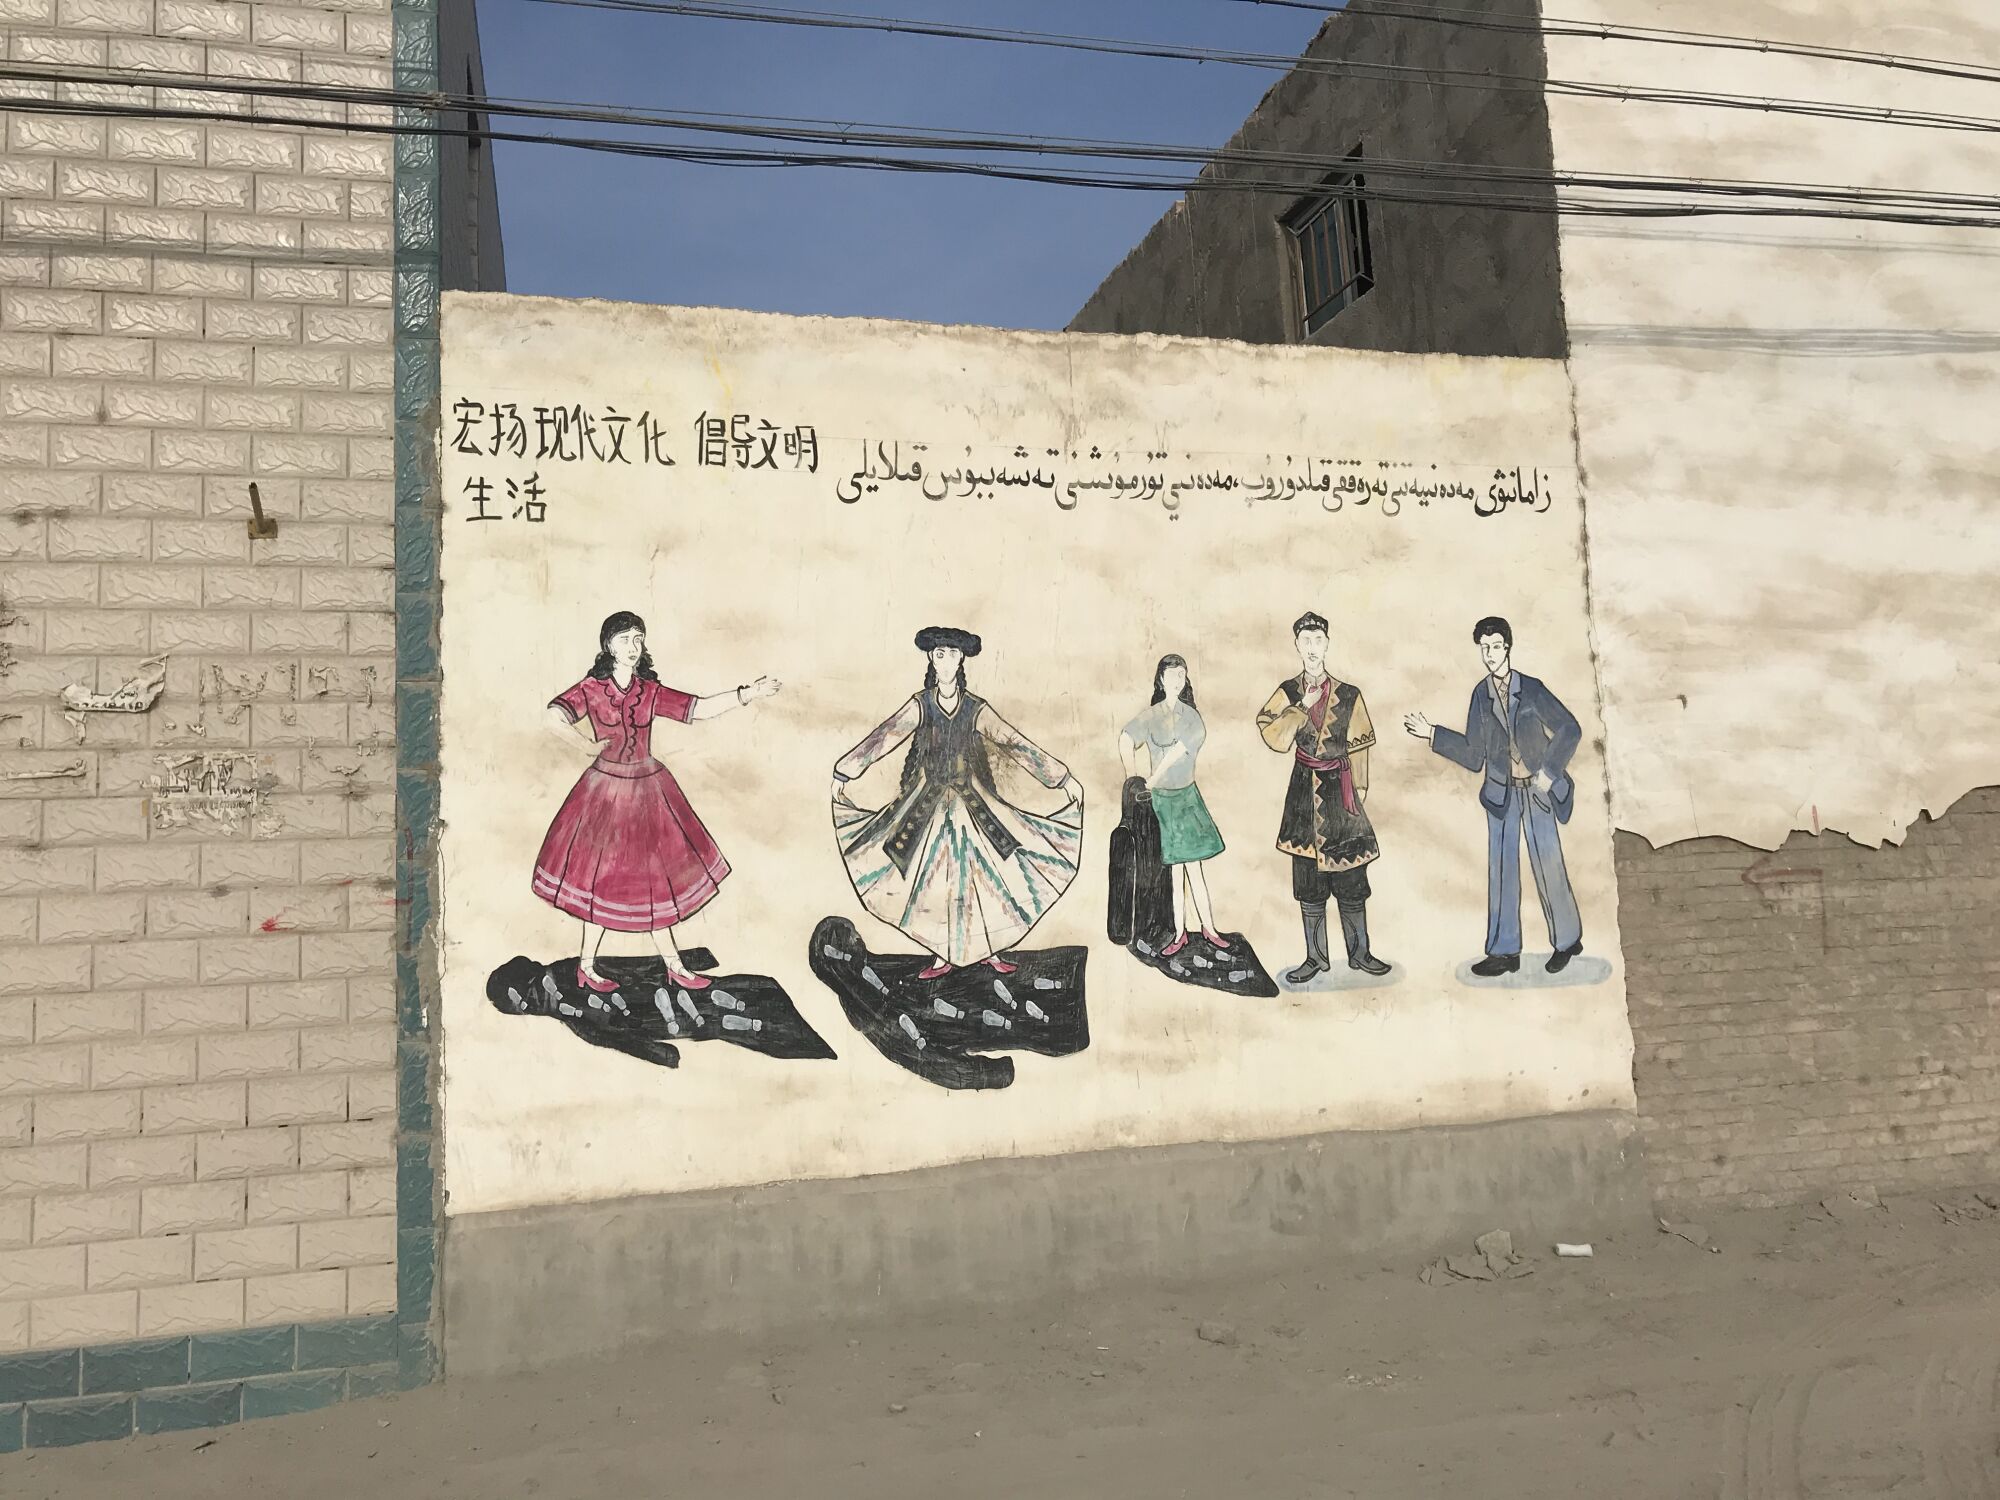 Murals on the walls of a village near Korla, Xinjiang, showed women bursting out of dark veils into colorful clothing.